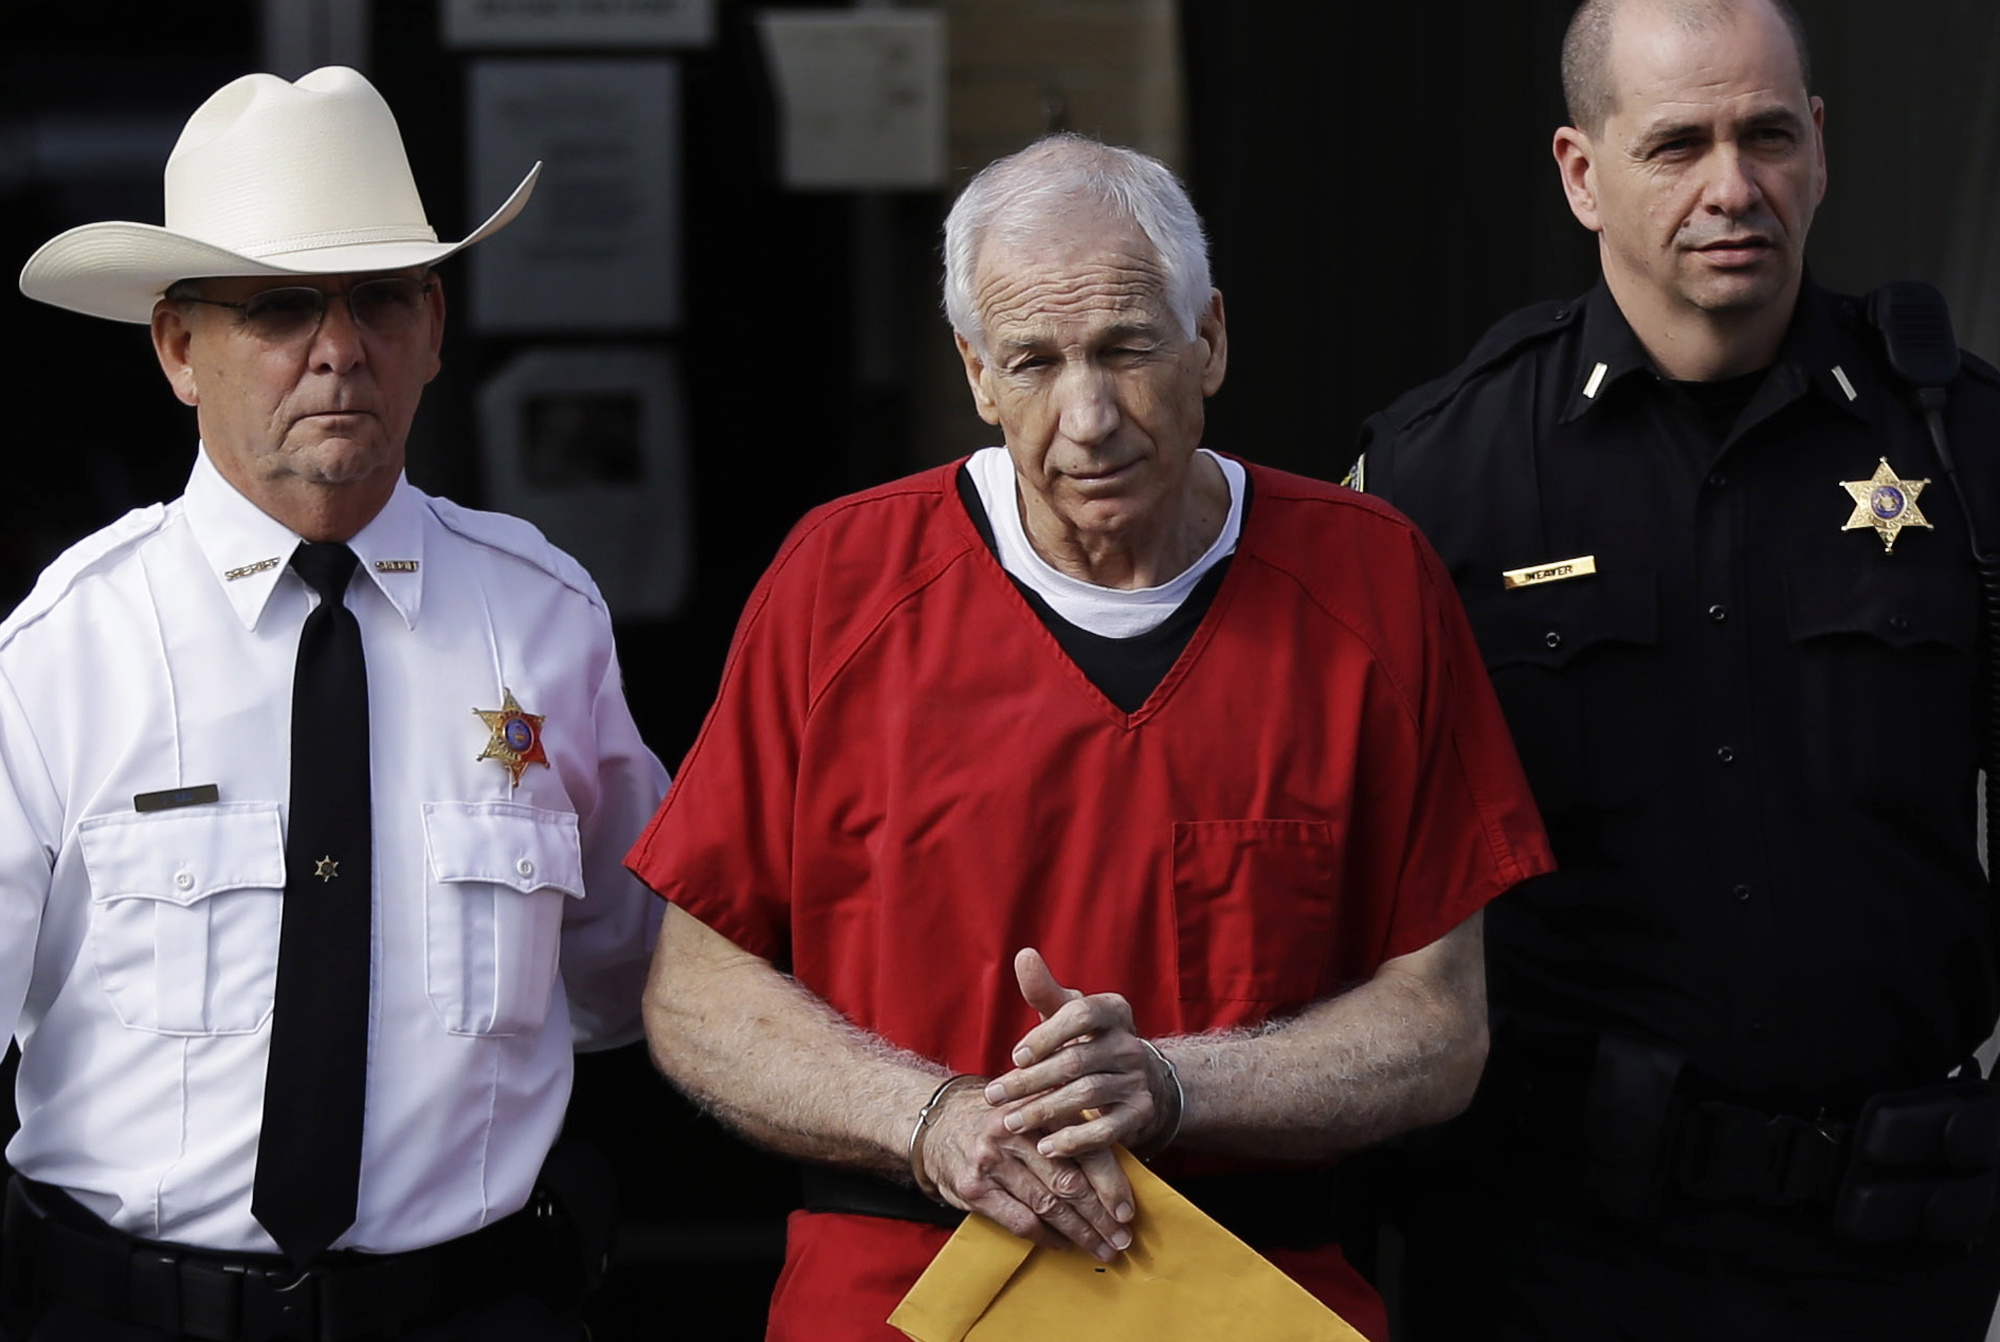 Associated Press files
Former Penn State University assistant football coach Jerry Sandusky, right, is taken from the Centre County Courthouse in Bellefonte, Pa., after being sentenced to at least 30 years in prison in October.